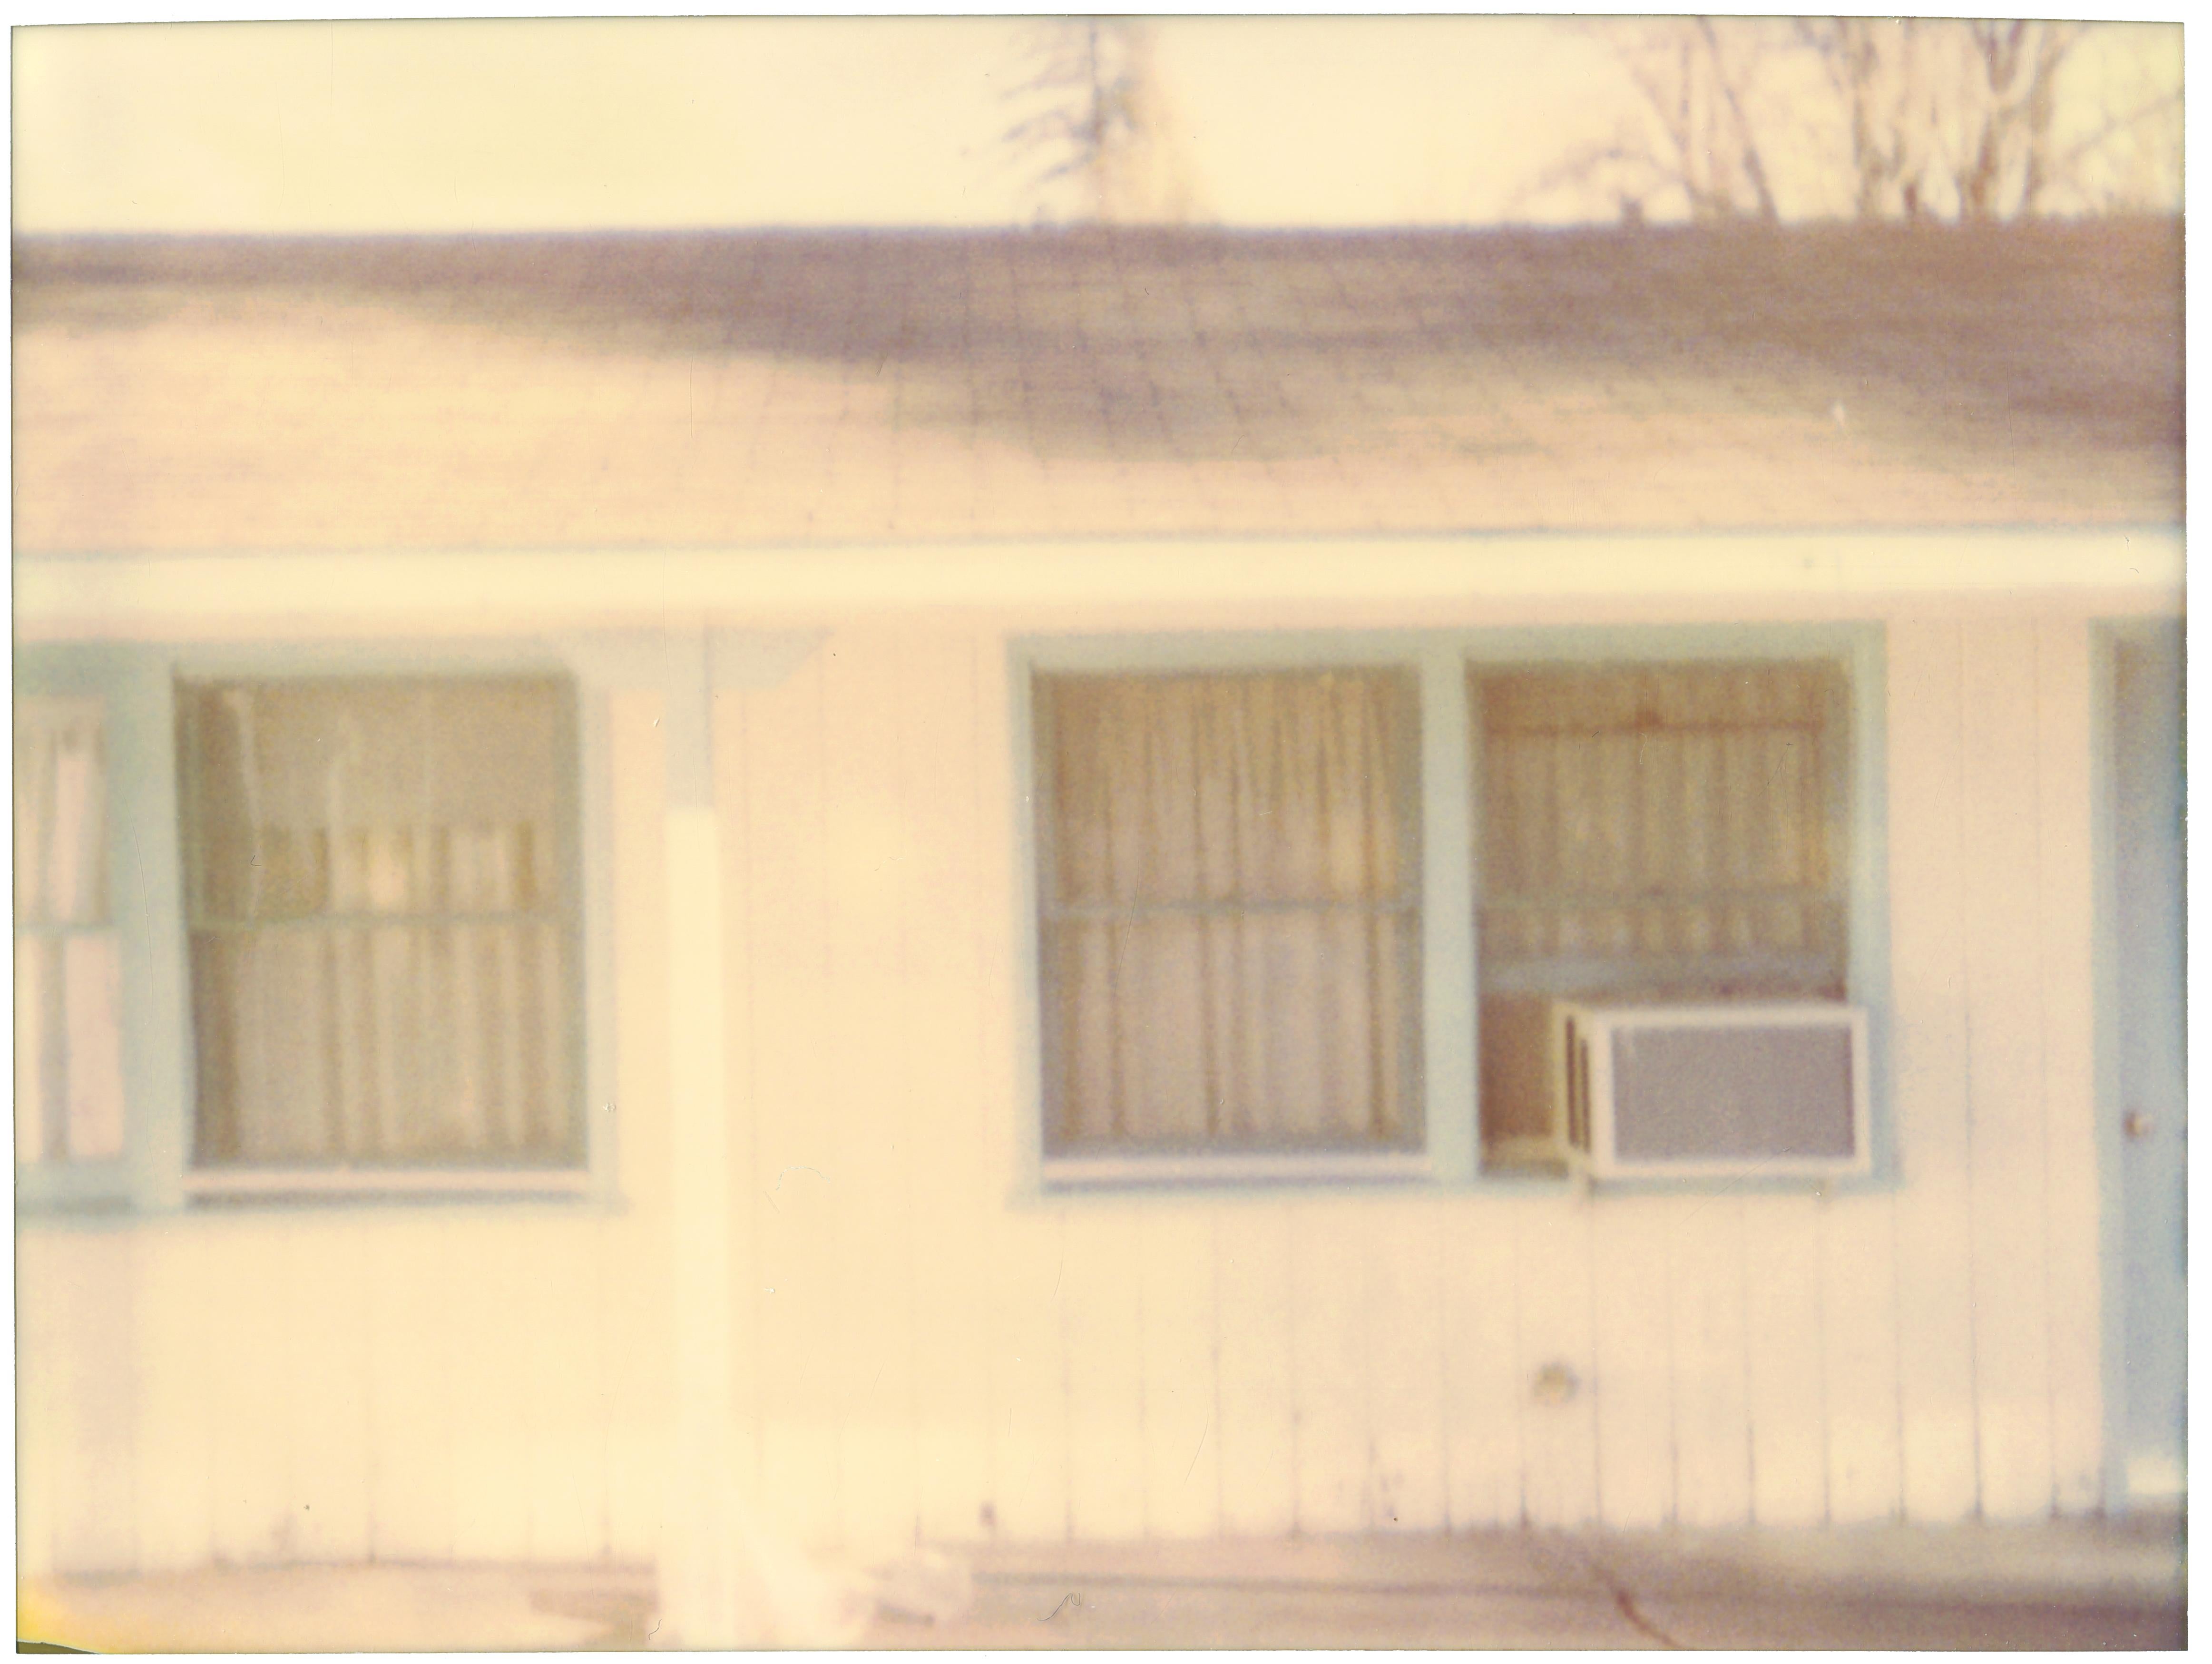 Stefanie Schneider Color Photograph - Lone Pine Motel I (The Last Picture Show) 60x80cm, analog, hand-print, mounted